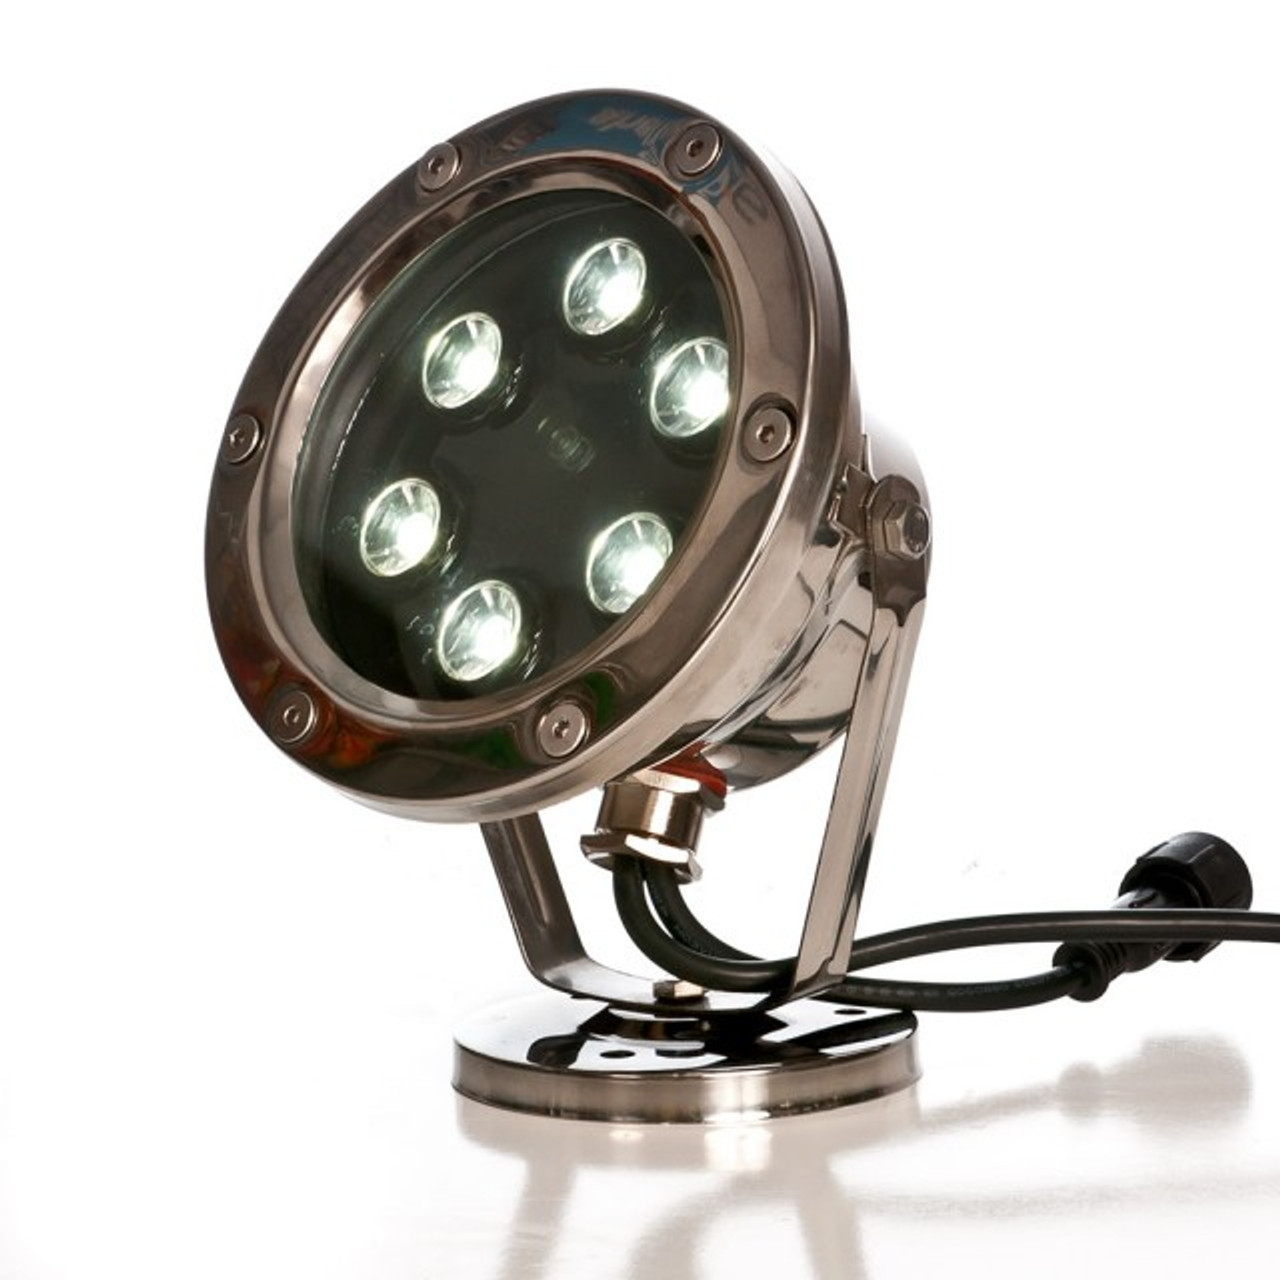 Lifegard LED Pond and Fountain Lights (FREE SHIPPING)